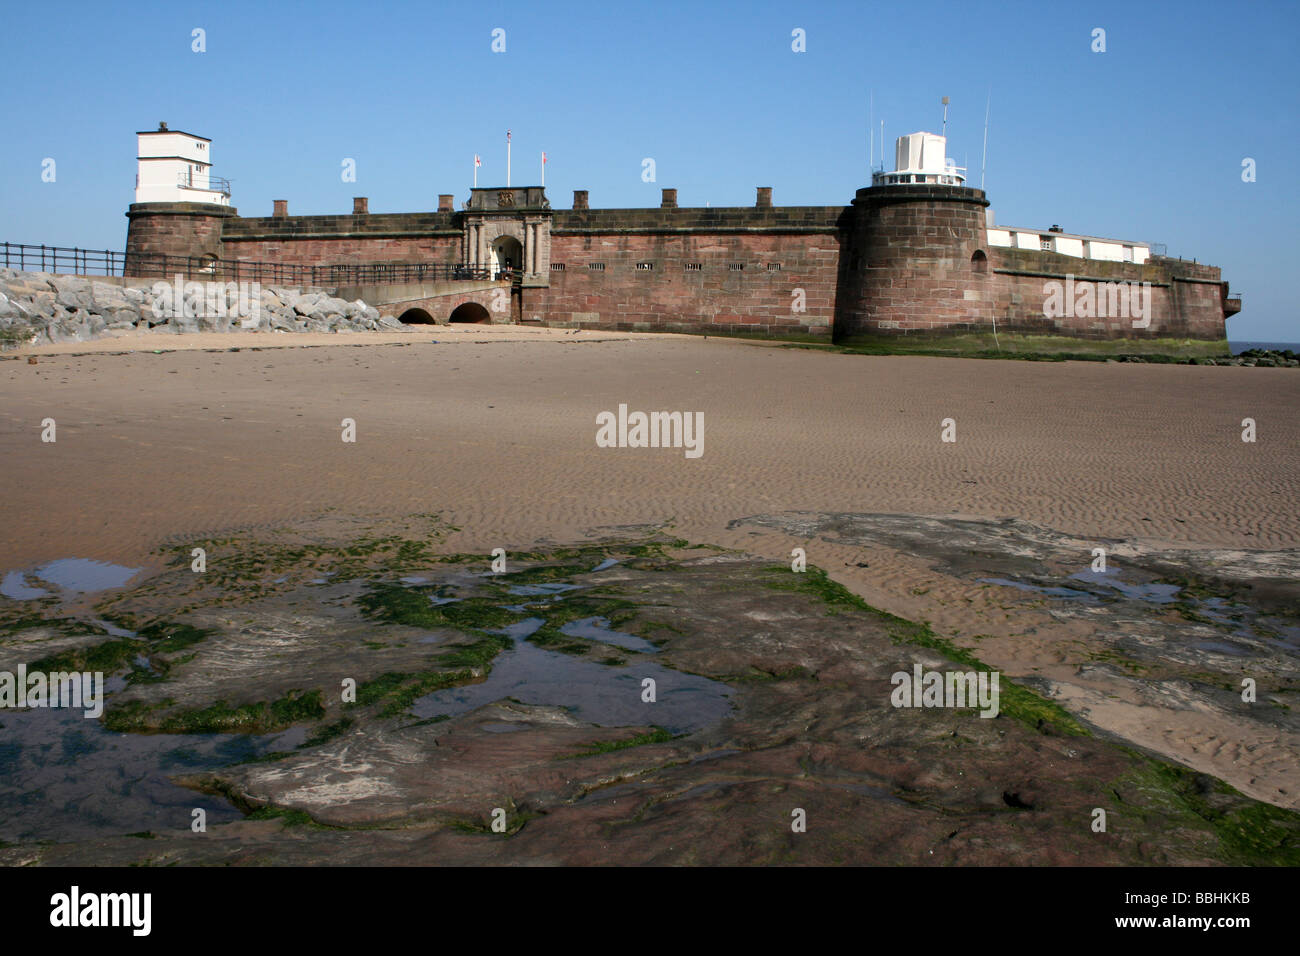 Fort Perchaude Rock à New Brighton, Wallasey, le Wirral, Merseyside, Royaume-Uni Banque D'Images